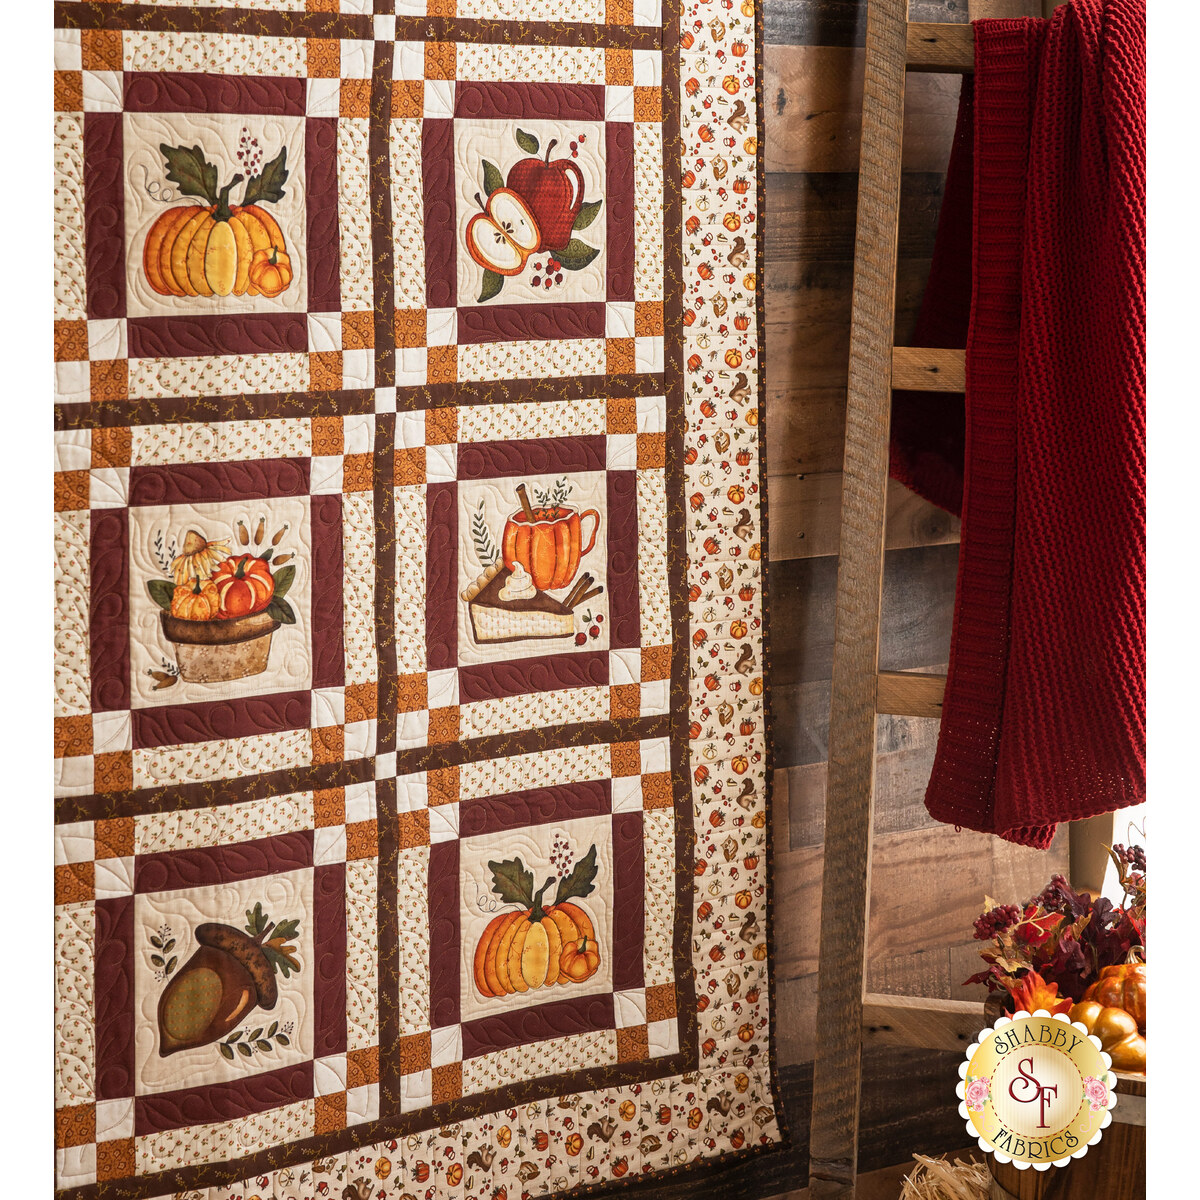 Falling for Autumn Quilt Fabric Kit